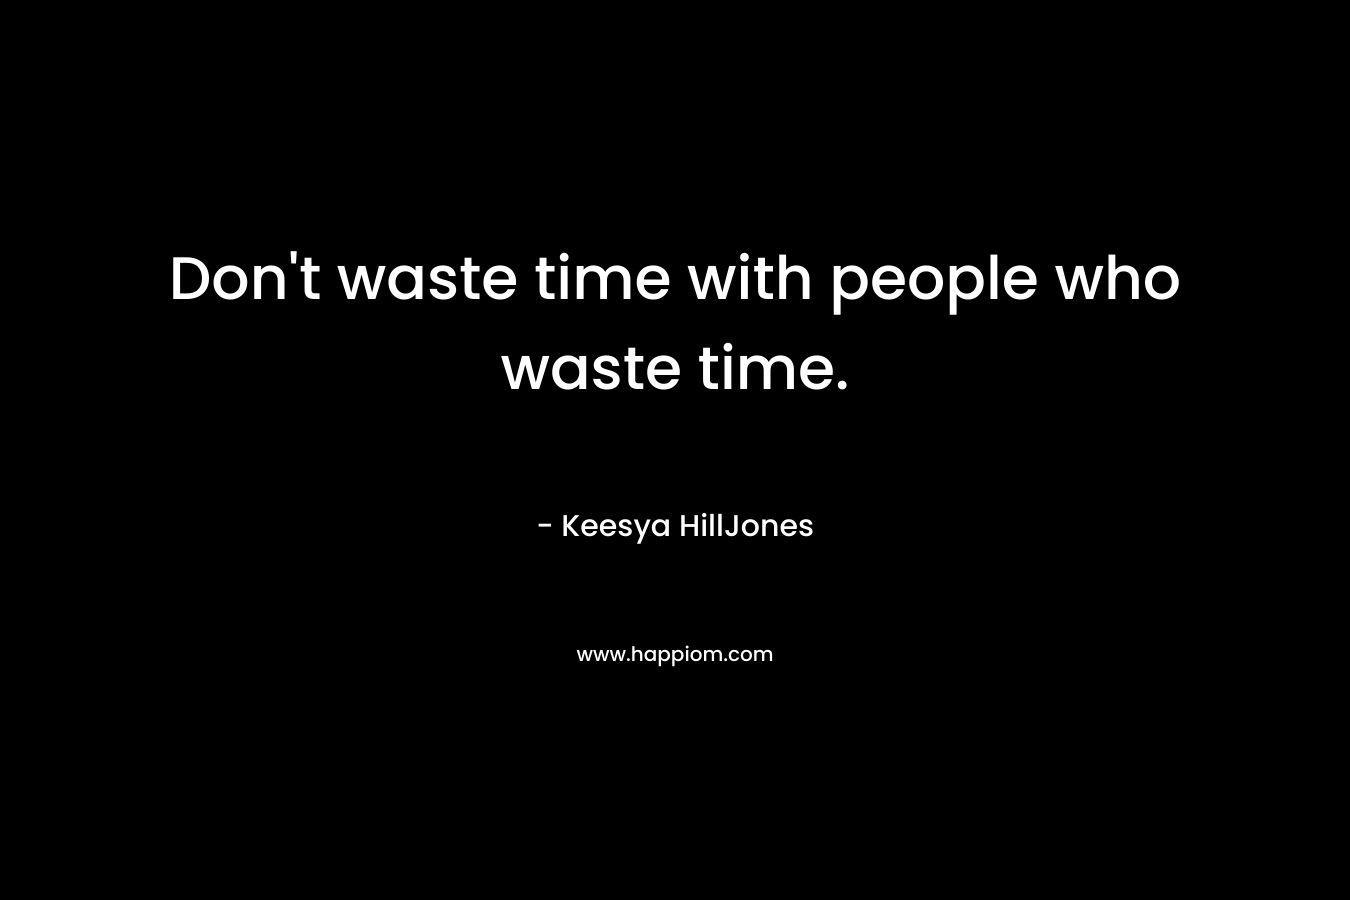 Don't waste time with people who waste time.